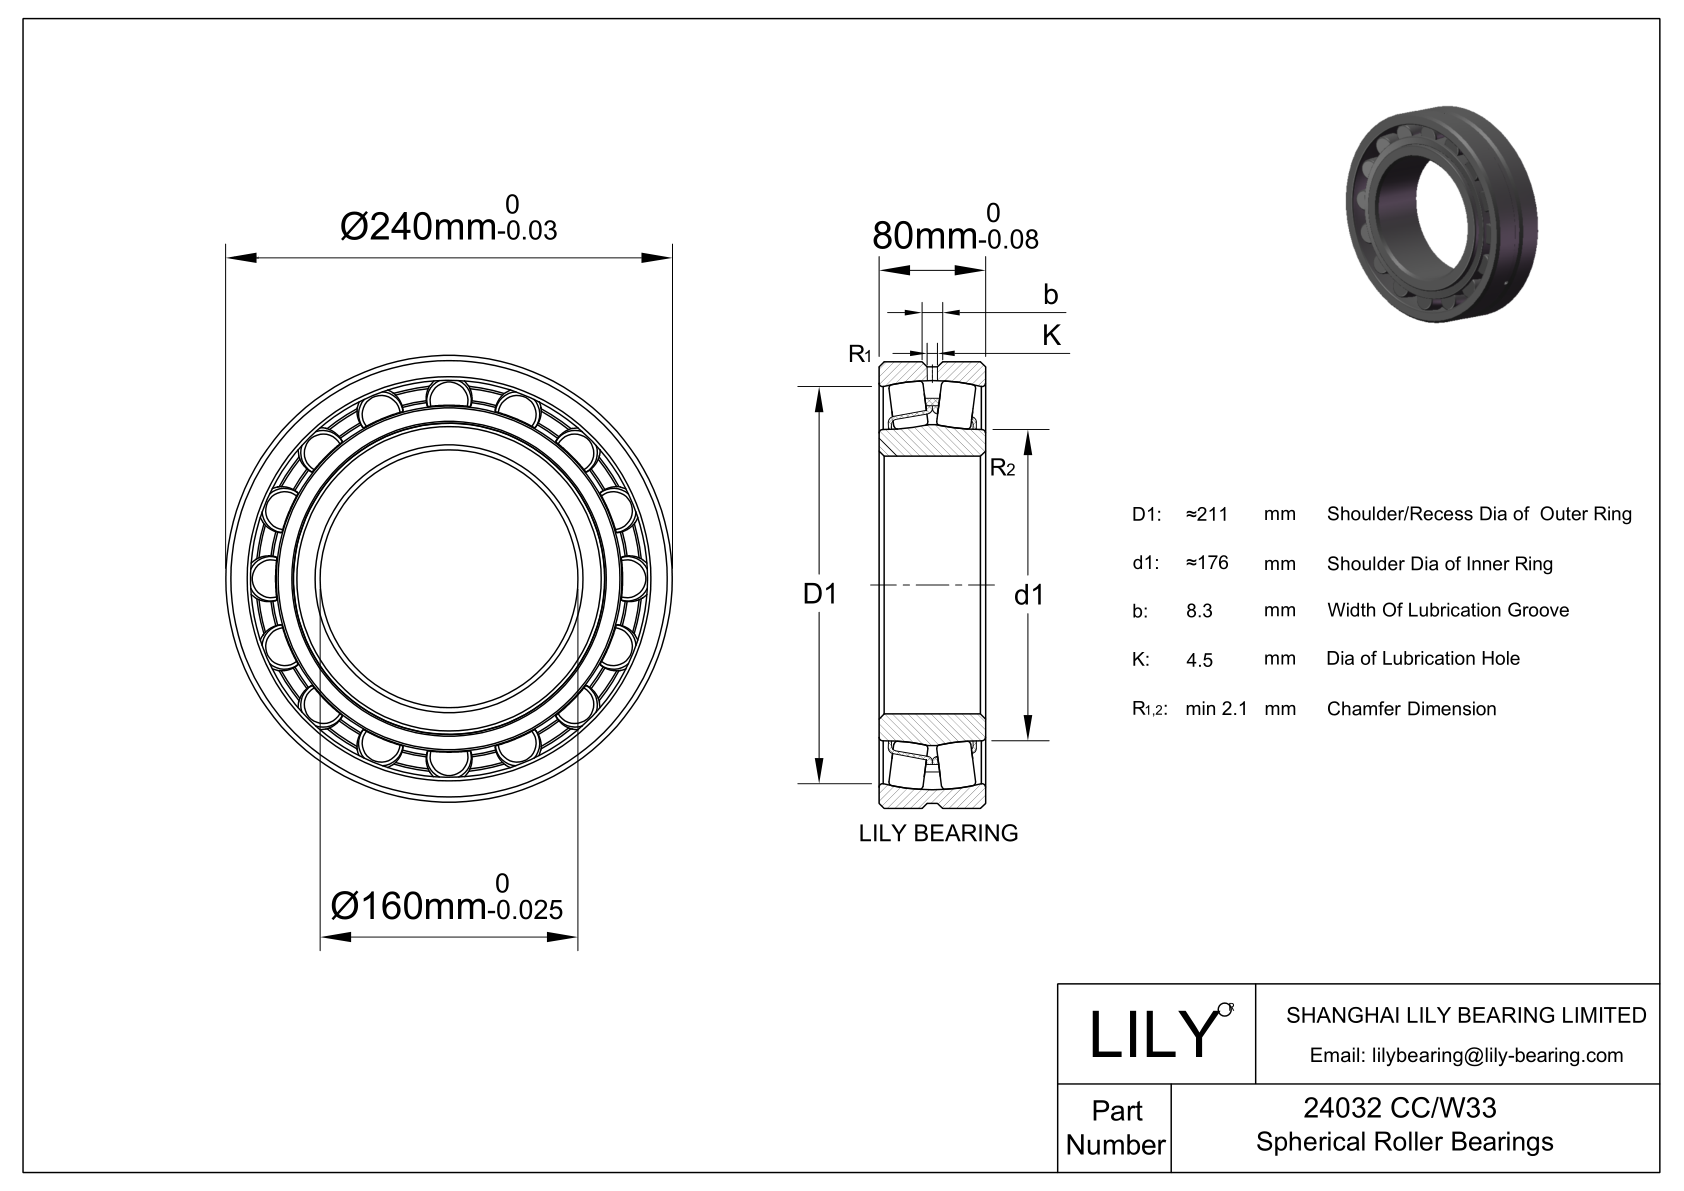 24032 CC/W33 Double Row Spherical Roller Bearing cad drawing